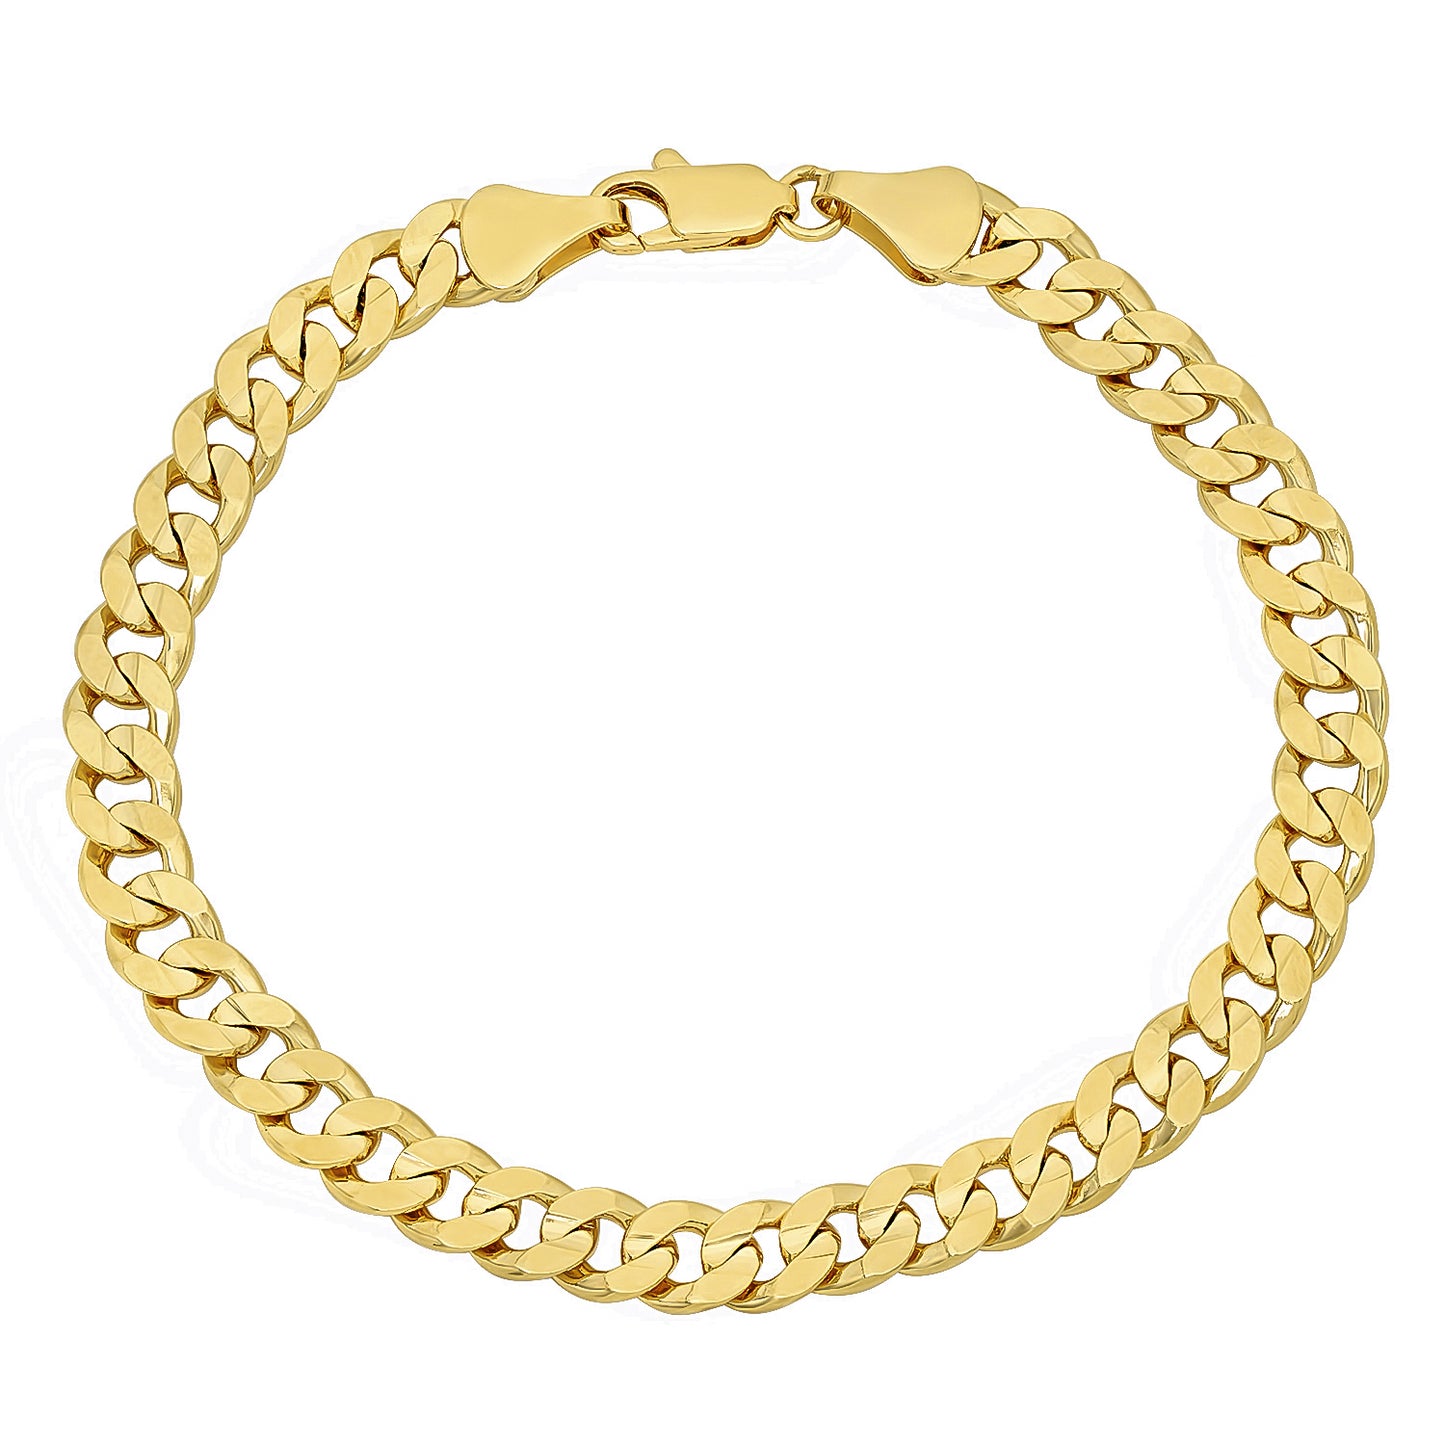 6mm-9mm Polished 14k Yellow Gold Plated Flat Curb Chain Bracelet (SKU: GL-CURB-CONCAVE-BR)